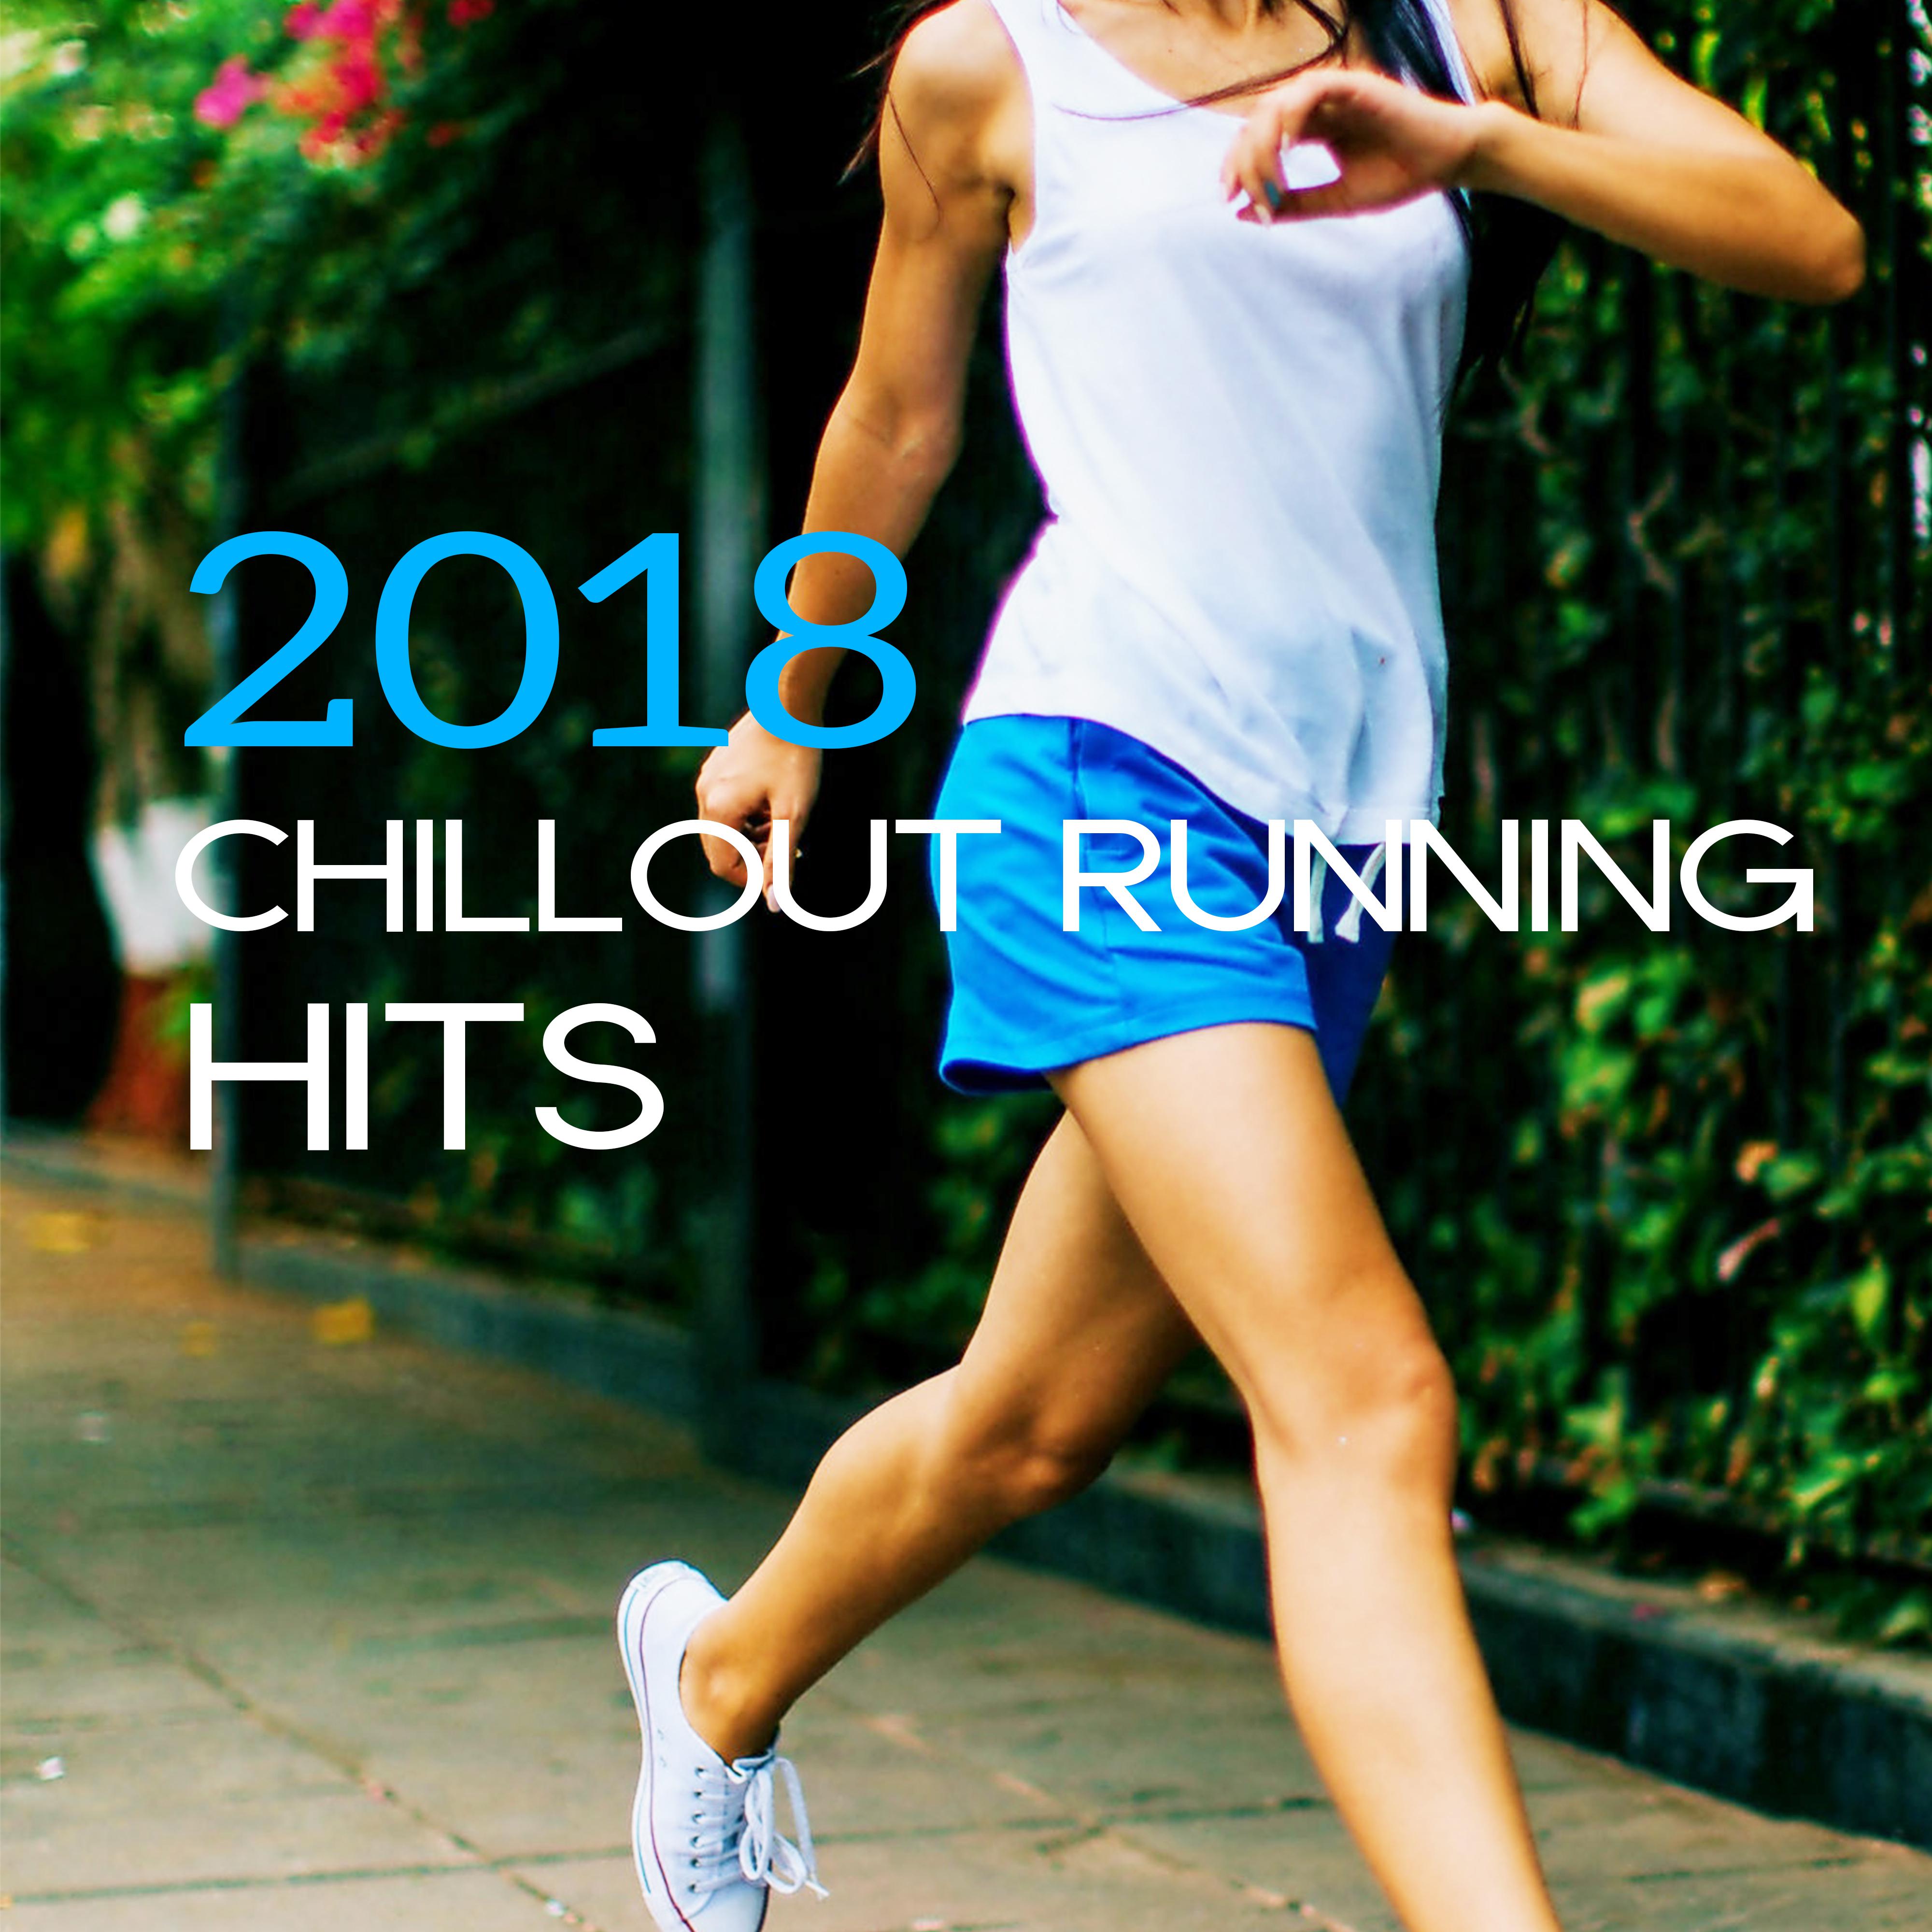 2018 Chillout Running Hits